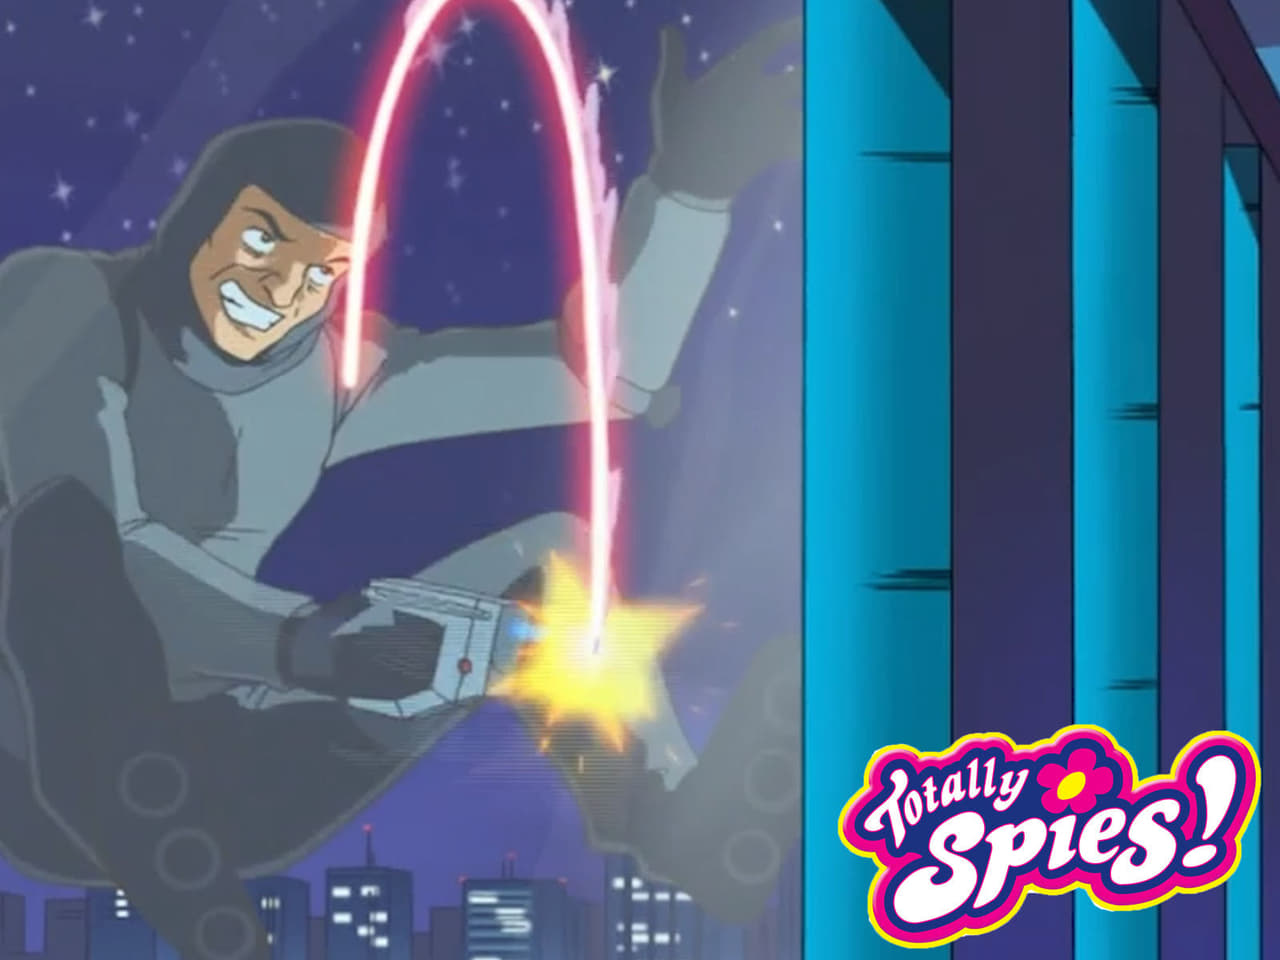 Totally Spies! - Season 2 Episode 20 : The Elevator